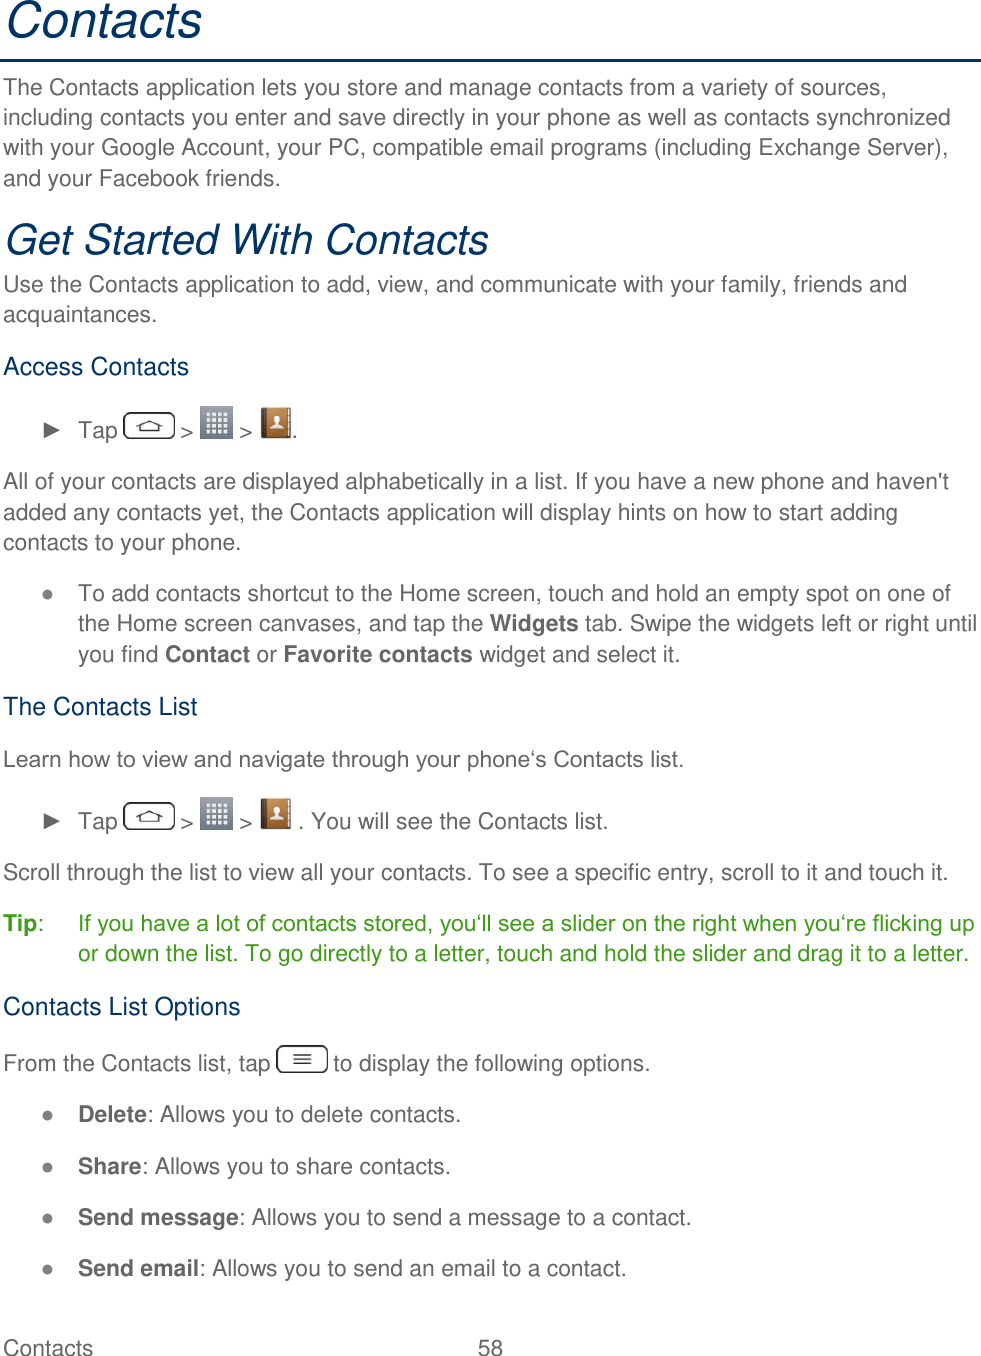  Contacts  58   Contacts The Contacts application lets you store and manage contacts from a variety of sources, including contacts you enter and save directly in your phone as well as contacts synchronized with your Google Account, your PC, compatible email programs (including Exchange Server), and your Facebook friends. Get Started With Contacts Use the Contacts application to add, view, and communicate with your family, friends and acquaintances. Access Contacts ►  Tap   &gt;   &gt;  . All of your contacts are displayed alphabetically in a list. If you have a new phone and haven&apos;t added any contacts yet, the Contacts application will display hints on how to start adding contacts to your phone. ● To add contacts shortcut to the Home screen, touch and hold an empty spot on one of the Home screen canvases, and tap the Widgets tab. Swipe the widgets left or right until you find Contact or Favorite contacts widget and select it. The Contacts List Learn how to view and navigate through your phone‗s Contacts list. ►  Tap   &gt;   &gt;   . You will see the Contacts list. Scroll through the list to view all your contacts. To see a specific entry, scroll to it and touch it. Tip:  If you have a lot of contacts stored, you‗ll see a slider on the right when you‗re flicking up or down the list. To go directly to a letter, touch and hold the slider and drag it to a letter. Contacts List Options From the Contacts list, tap   to display the following options. ● Delete: Allows you to delete contacts. ● Share: Allows you to share contacts. ● Send message: Allows you to send a message to a contact. ● Send email: Allows you to send an email to a contact. 